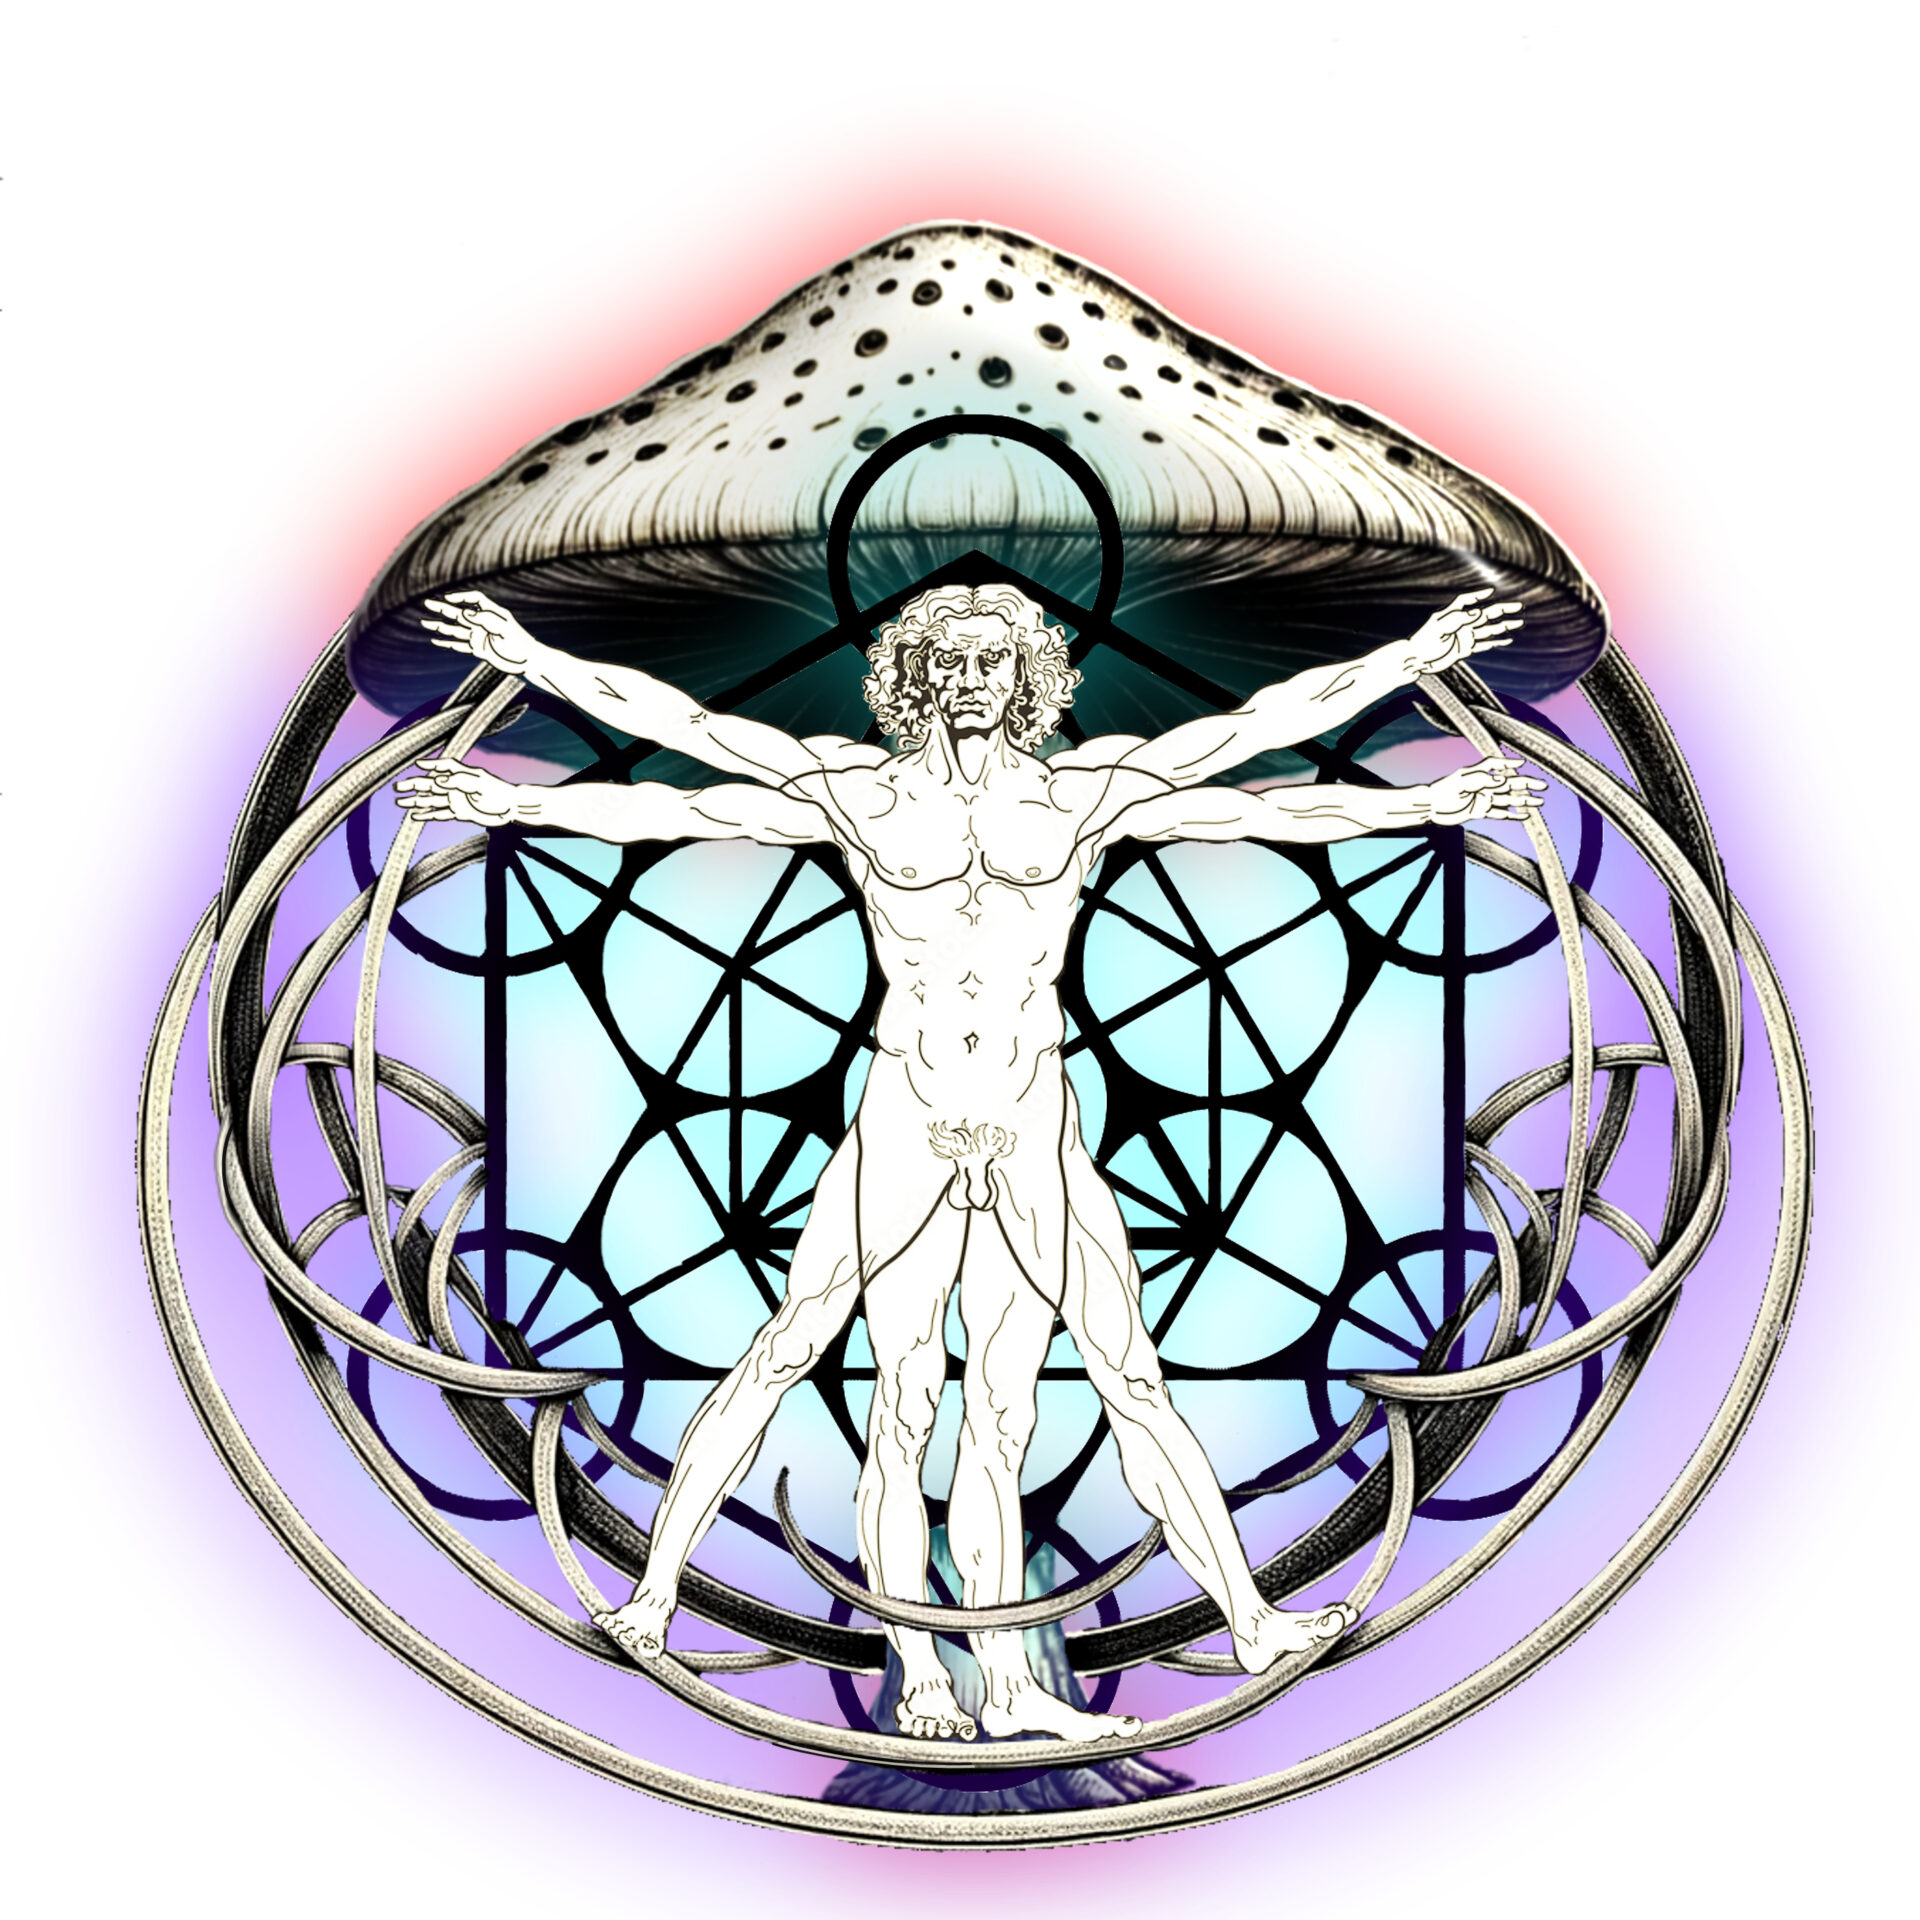 Leonardo da Vinci Vitruvian Man Metatron's Cube Celtic knotting three Halos and psychedelic mushroom as the the fruit of knowledge in the pursuit of perfection using Sacred Medicines.